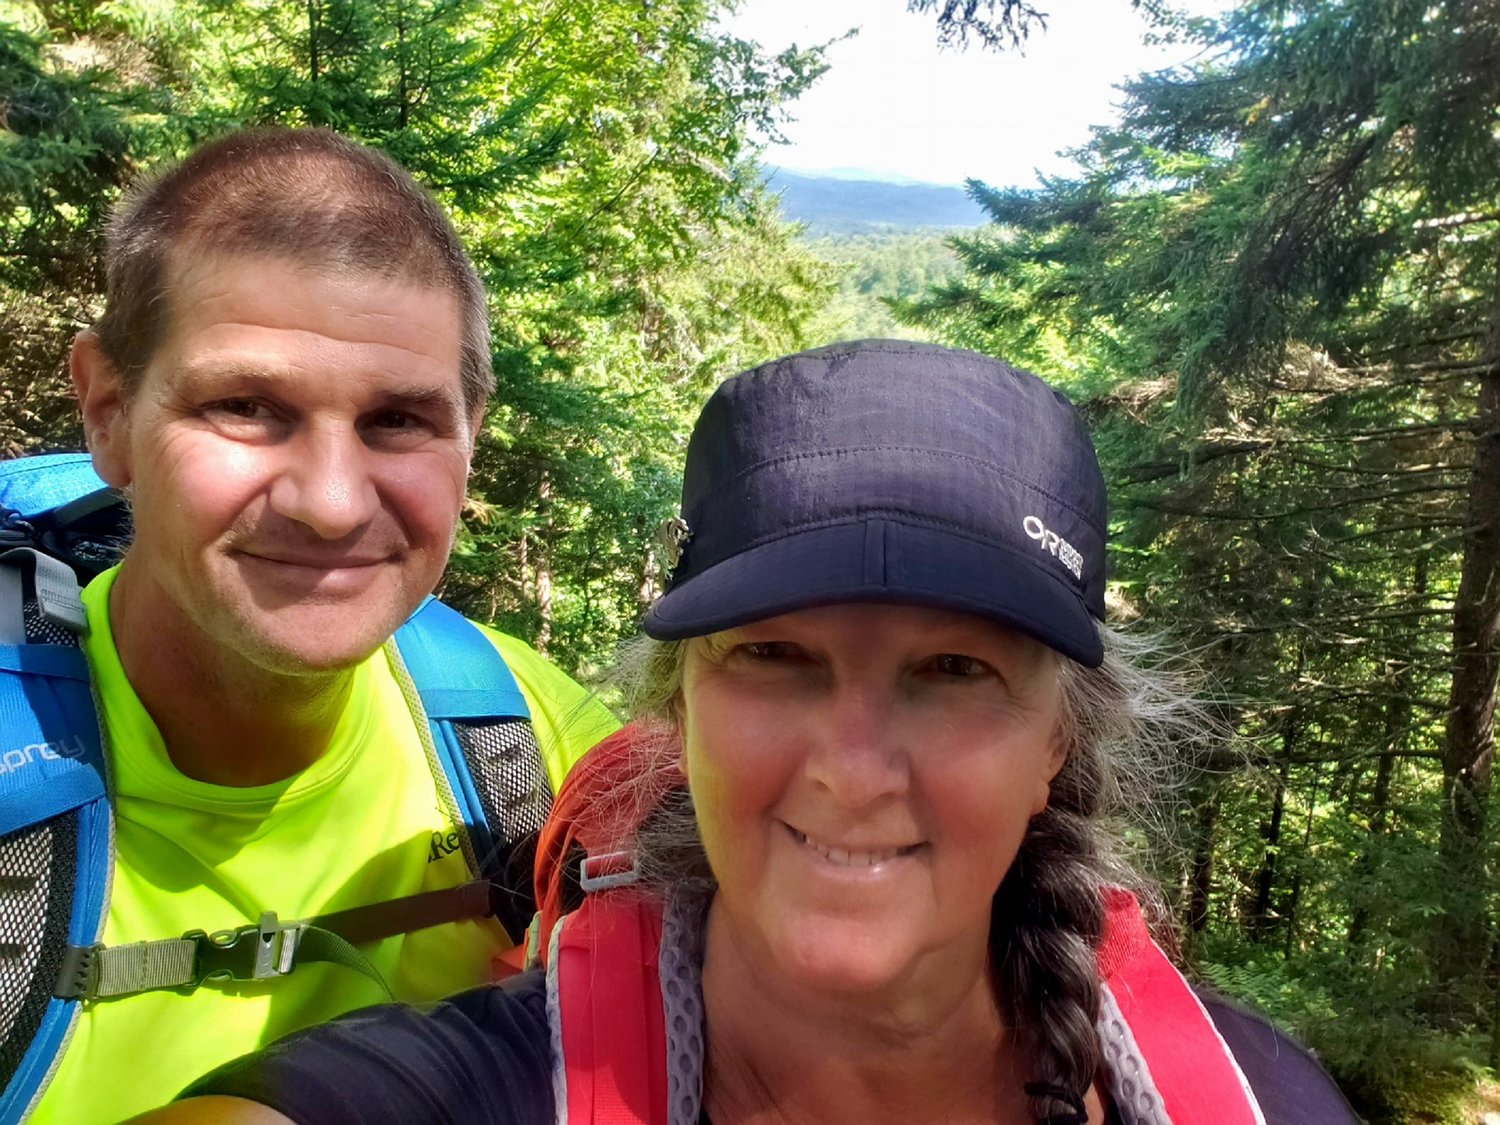 OUTDOOR EXPERIENCE — On Thursday, July 15, at 5 p.m., the Old Forge Library, 220 Crosby Blvd., will host a Mindful Outdoor Experience led by Mountain Mystics Guide Company founders John and Therá Levi. The event is an opportunity to learn and practice techniques for mindful connection with nature, cultivate balance and inspiration and release stress, organizers say.  The session is free and open to all. Participants are urged to dress for the weather. Call 315 369-6008 to register for planning purposes. Walk-ins are also welcome. More information about the company can be found at https://www.facebook.com/mtmysticsguideco/.